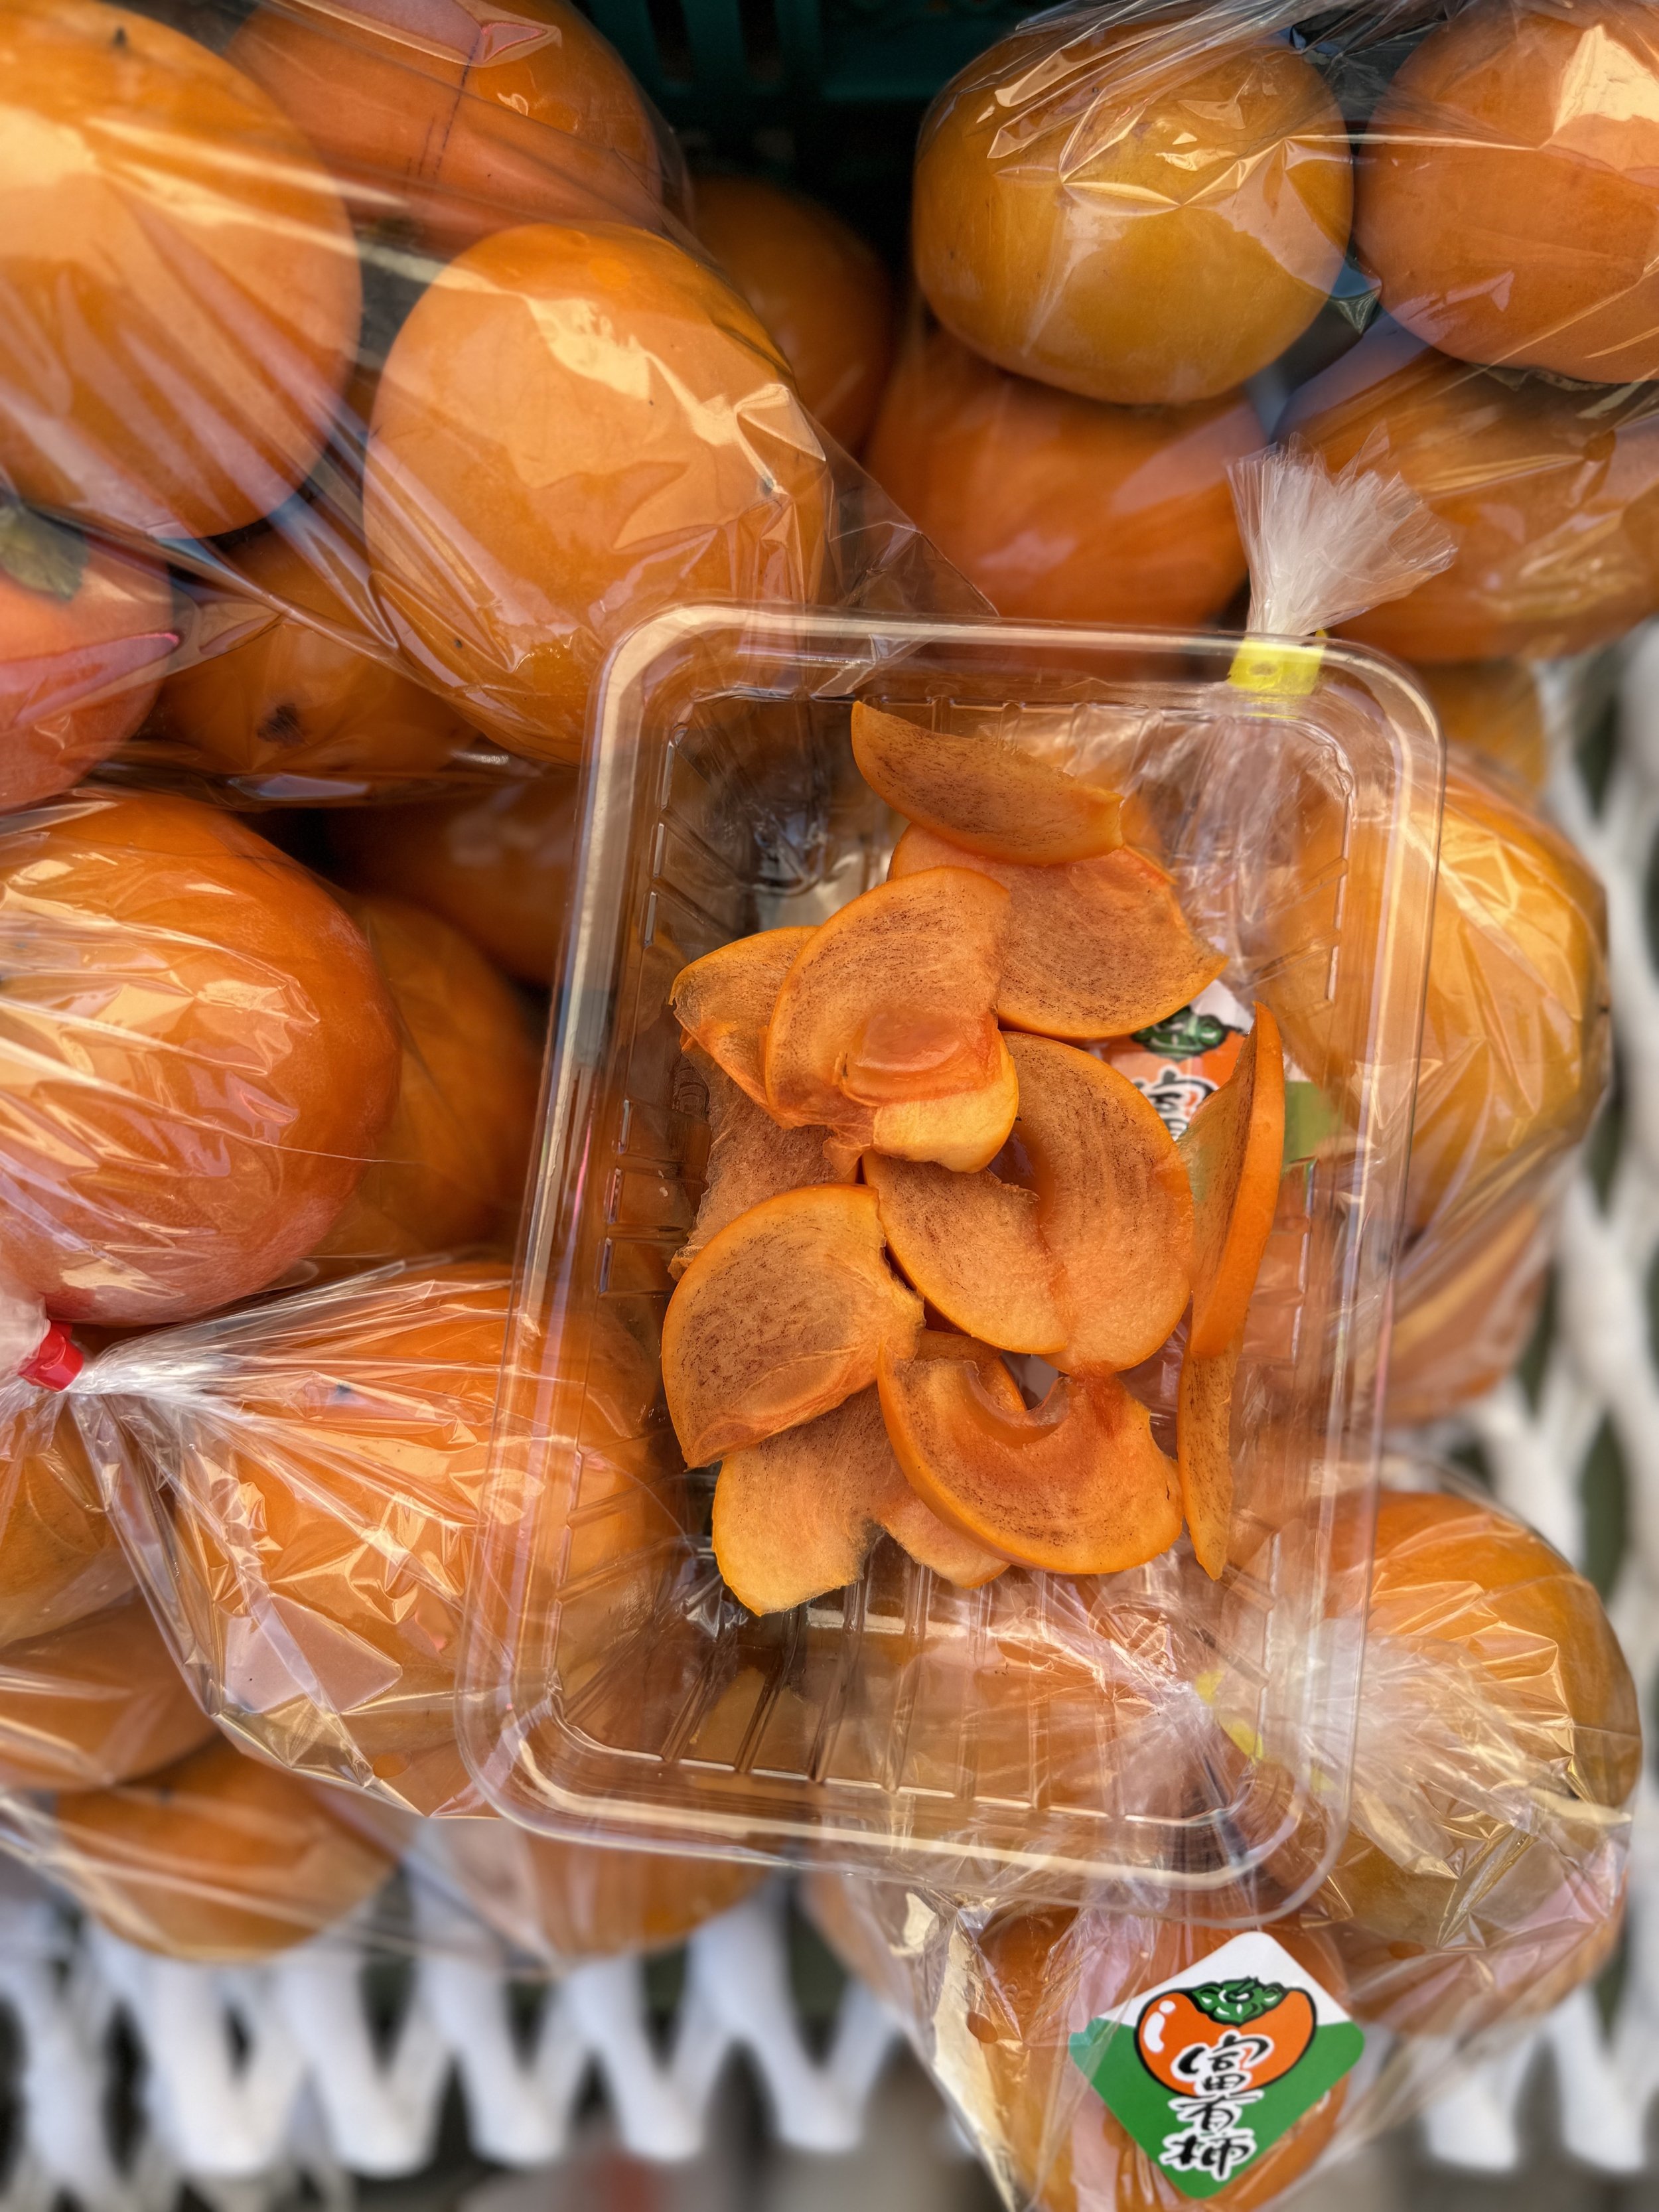 Persimmons at the Market.jpg